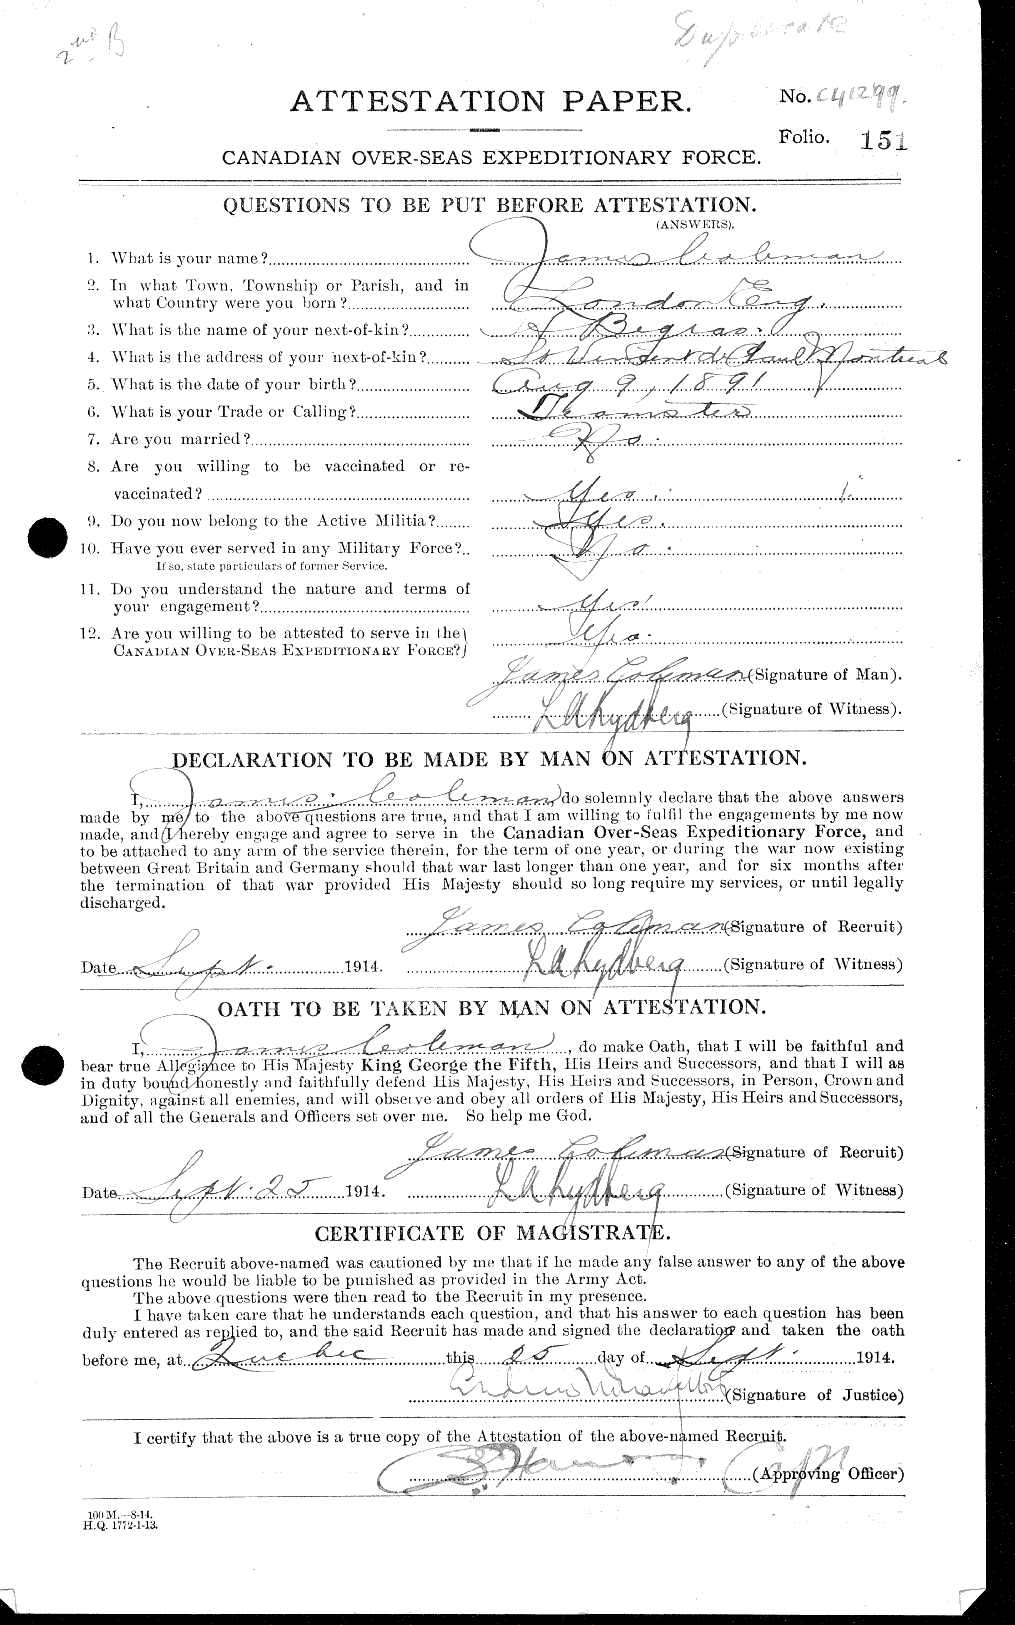 Personnel Records of the First World War - CEF 028185a